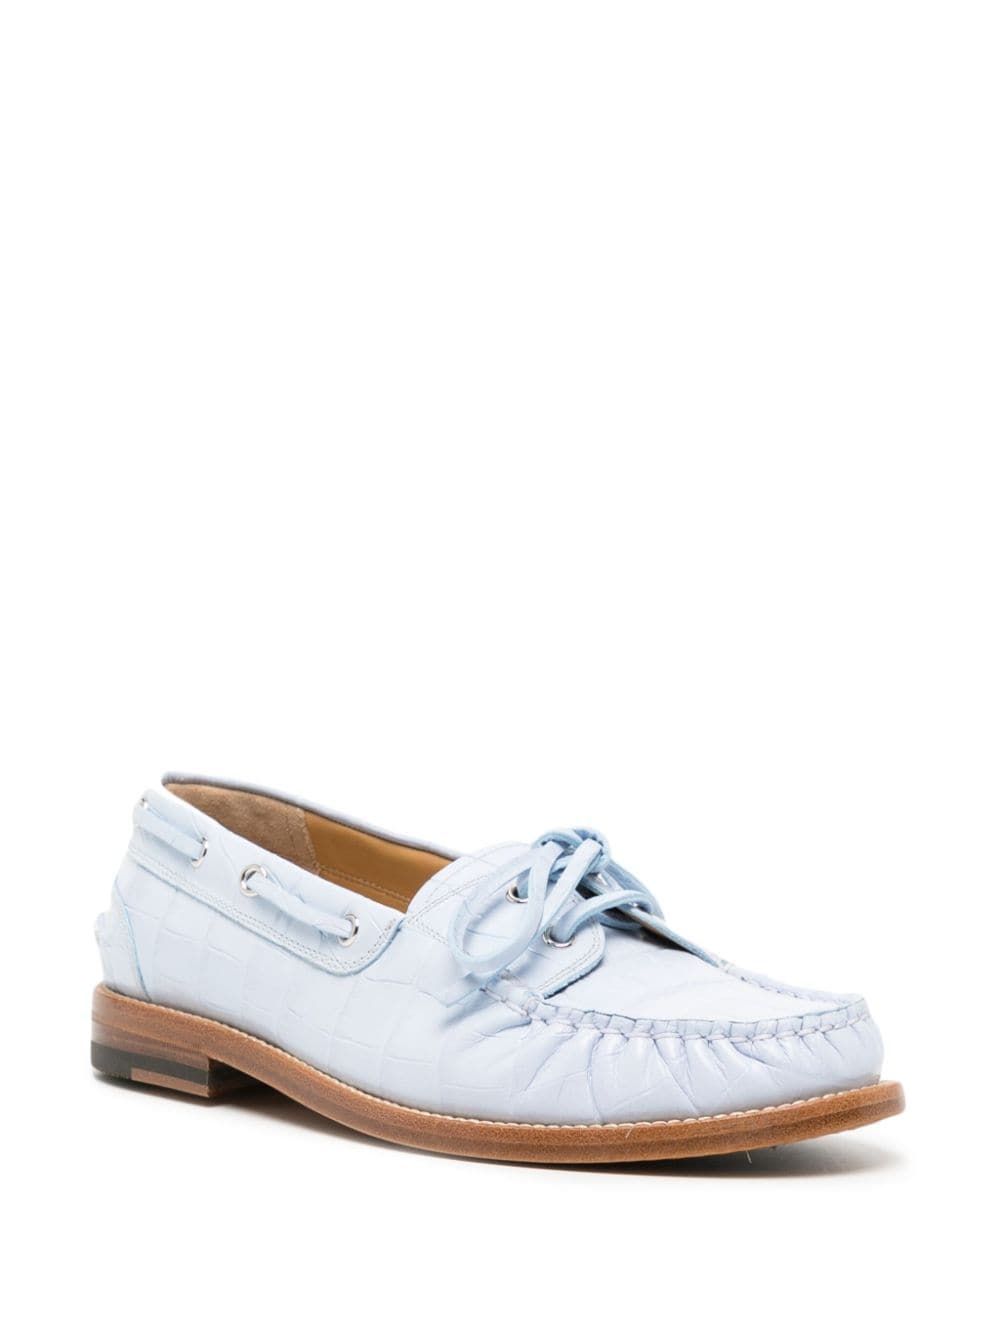 Bally Plume boat shoes - Pink